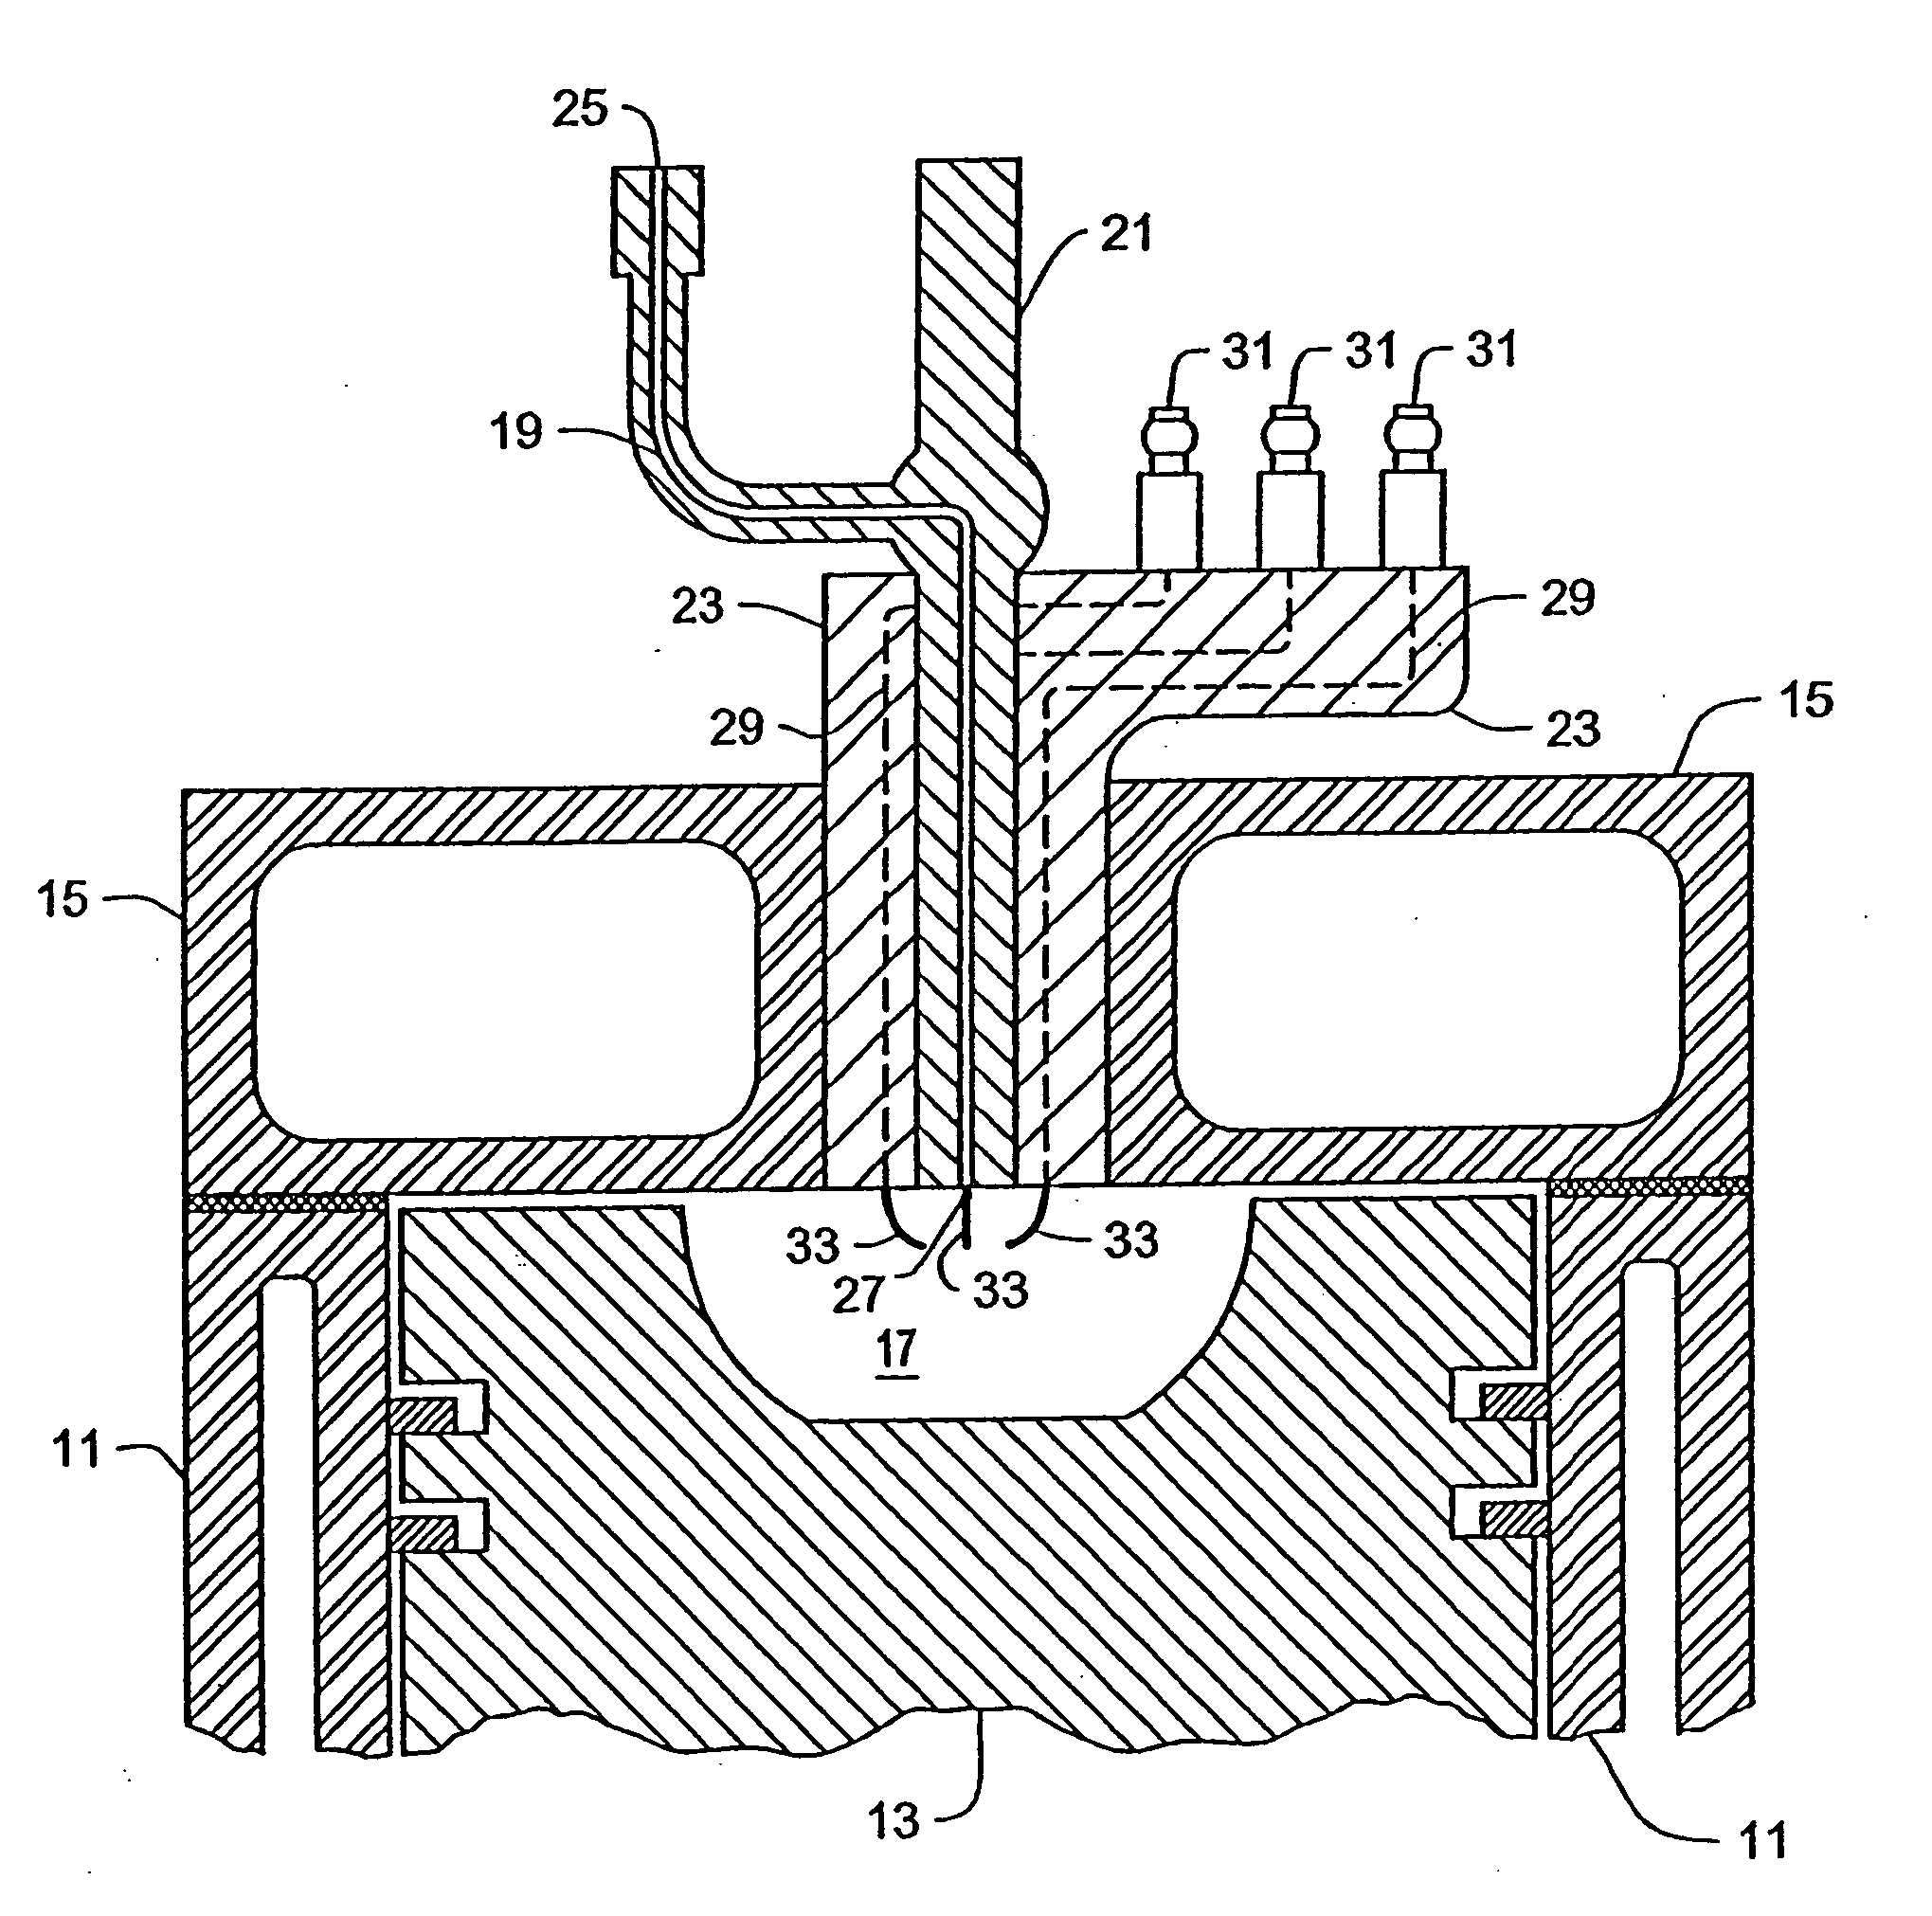 Furnace using plasma ignition system for hydrocarbon combustion